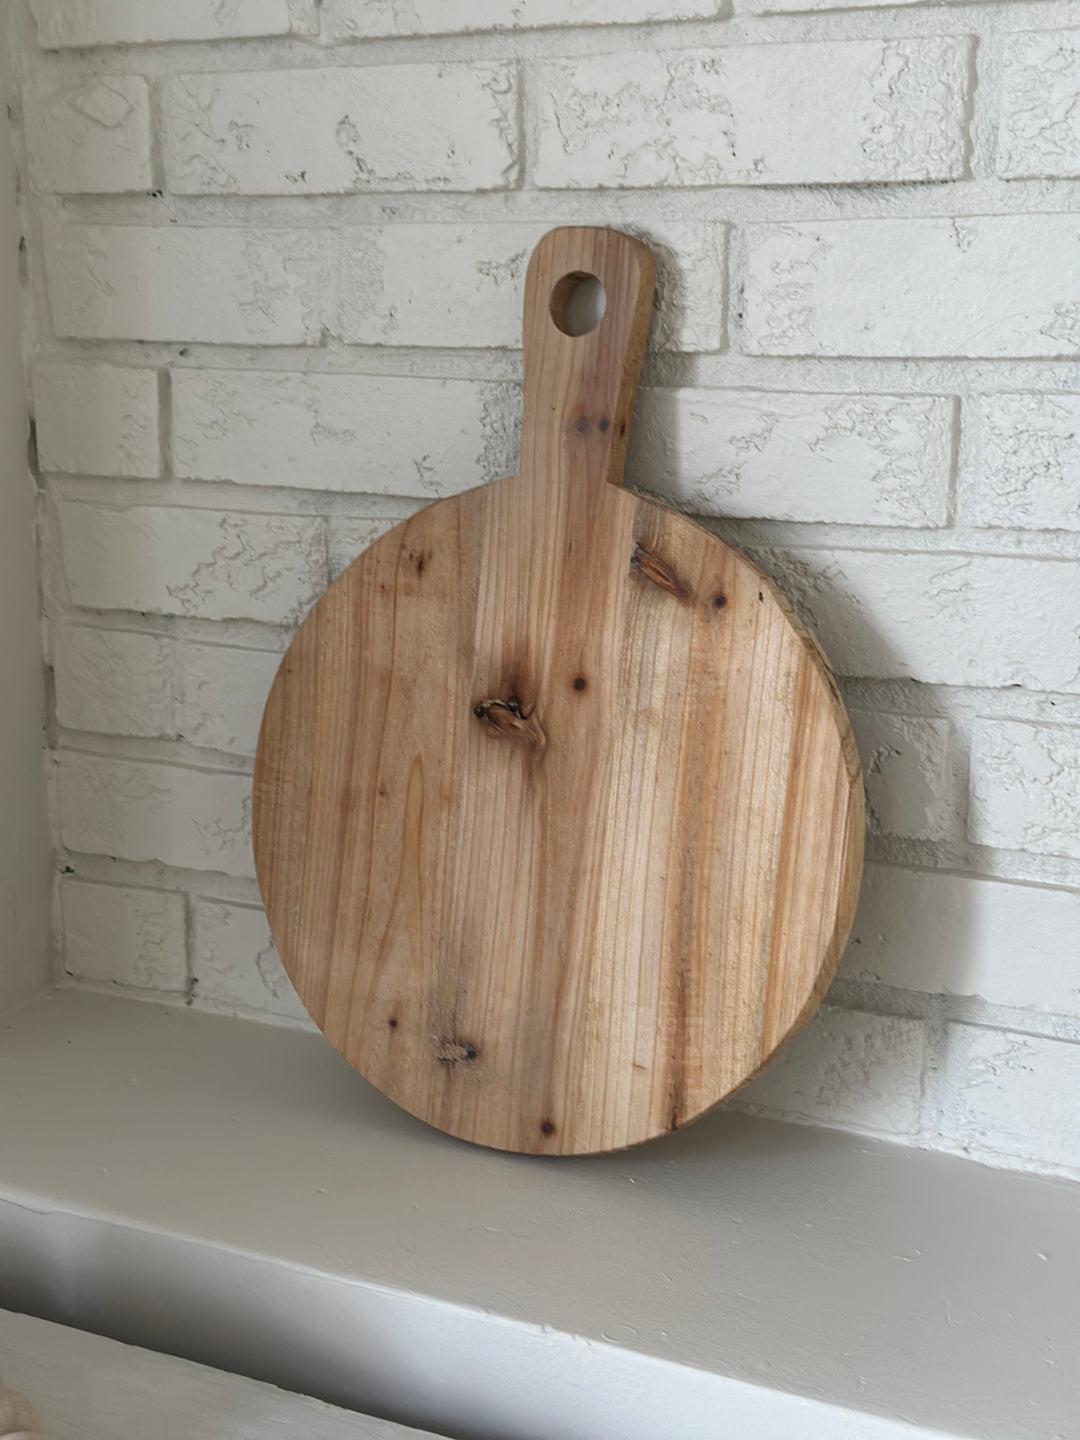 Round Wood Serving Tray